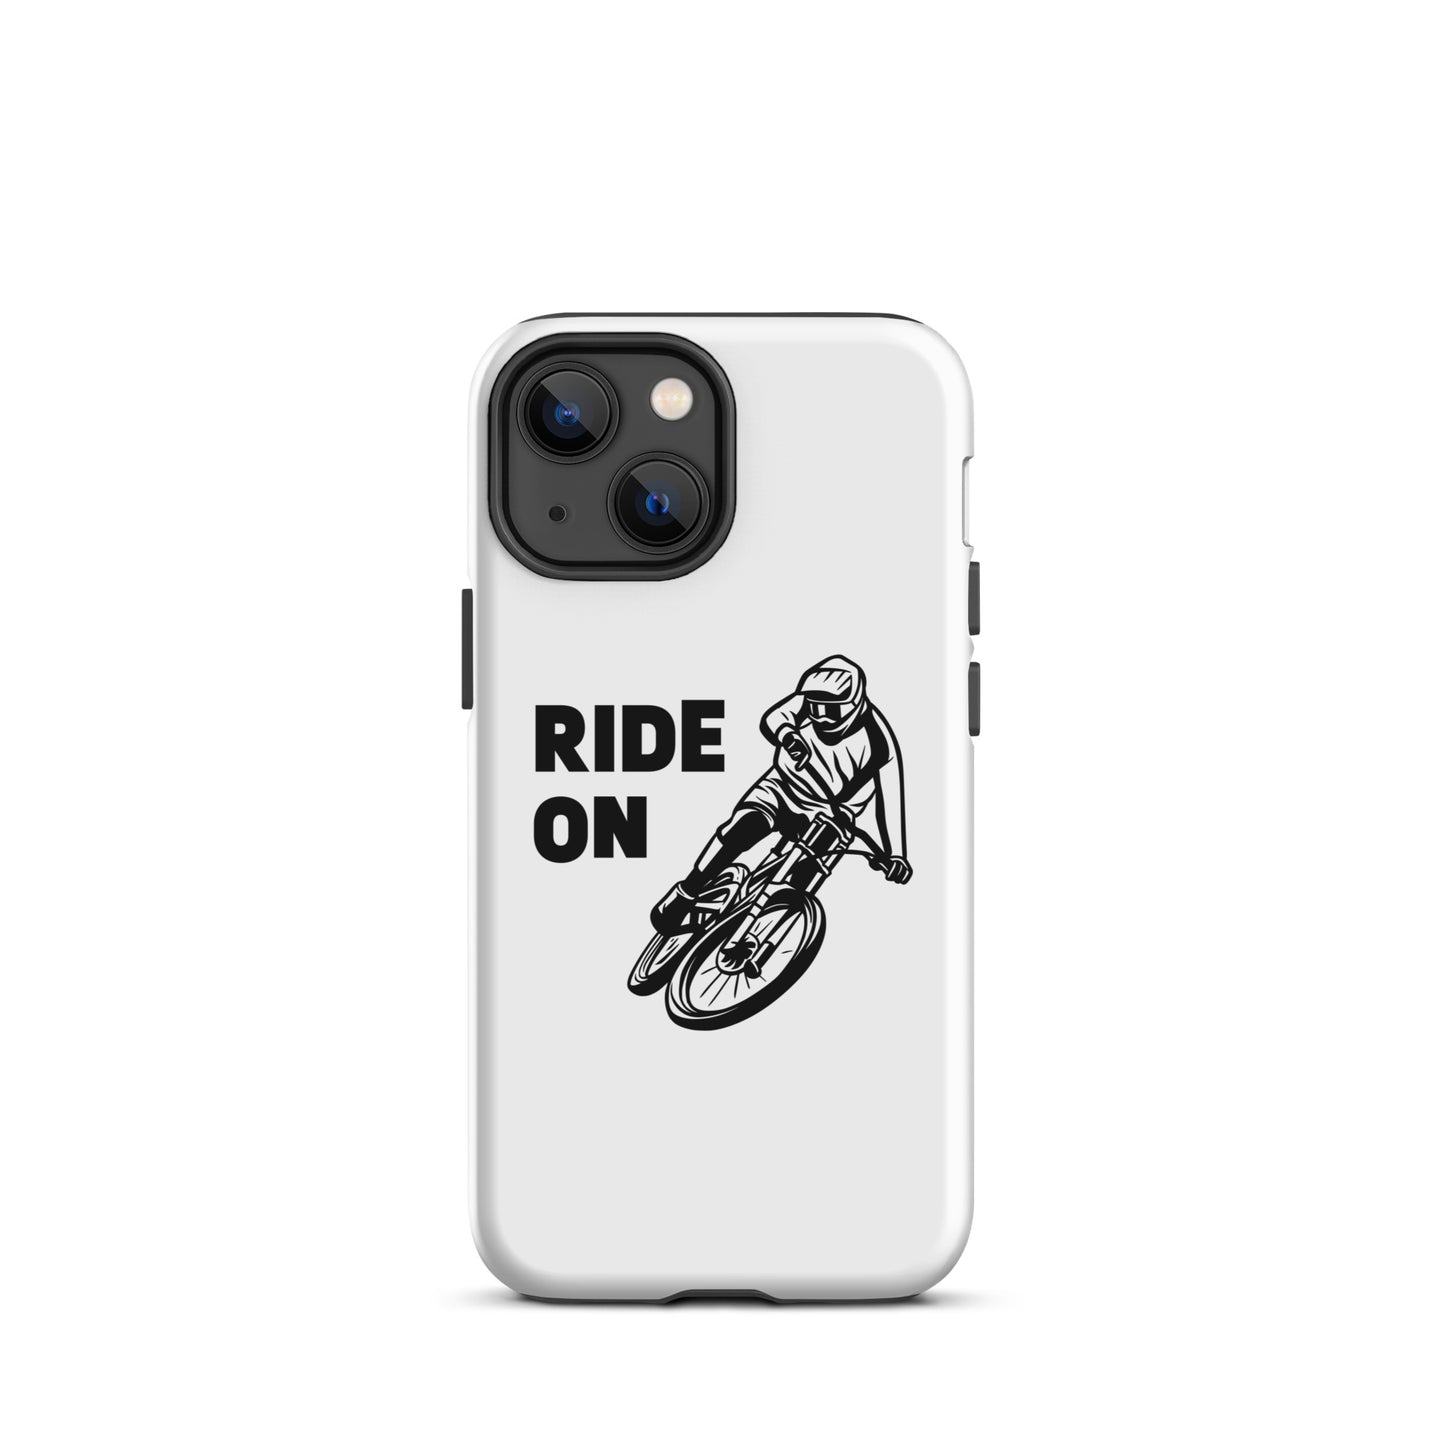 Ride On - Tough iPhone case